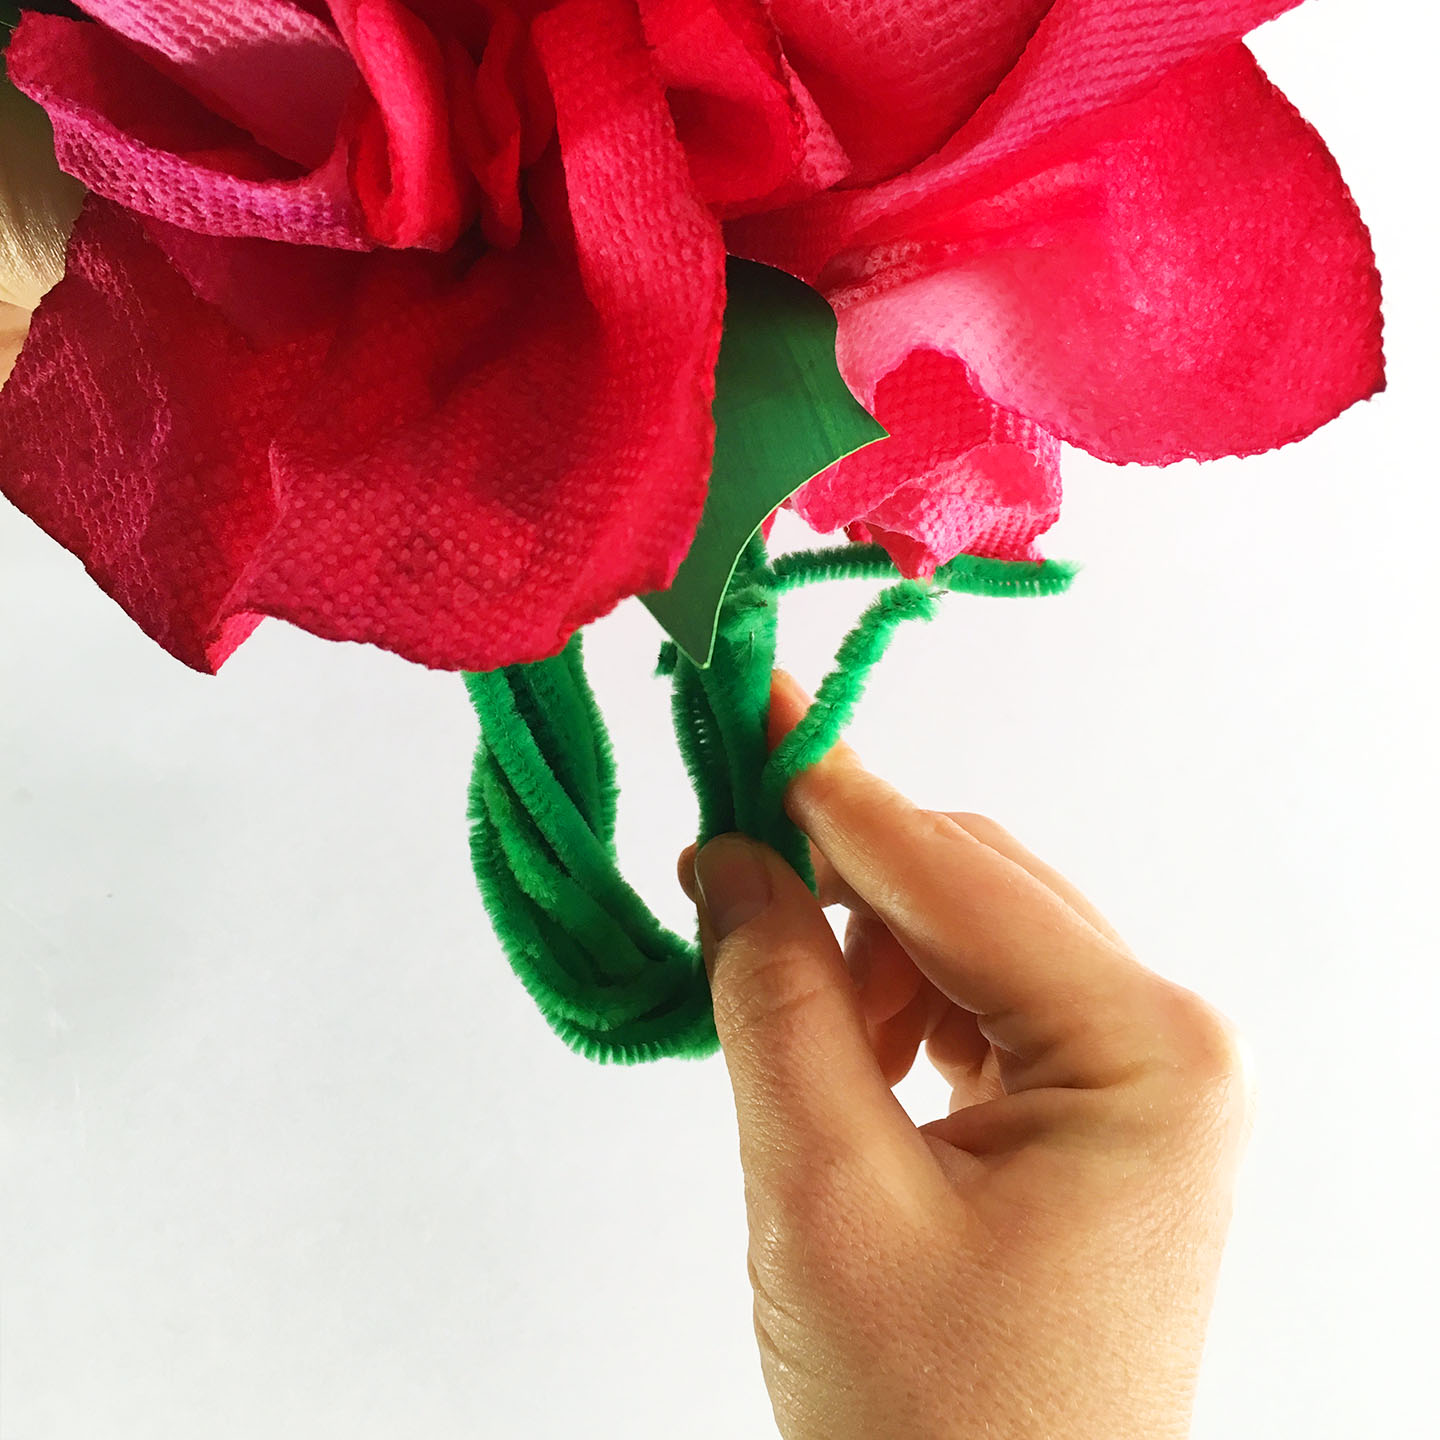 Poinsettia craft for kids twist stems up